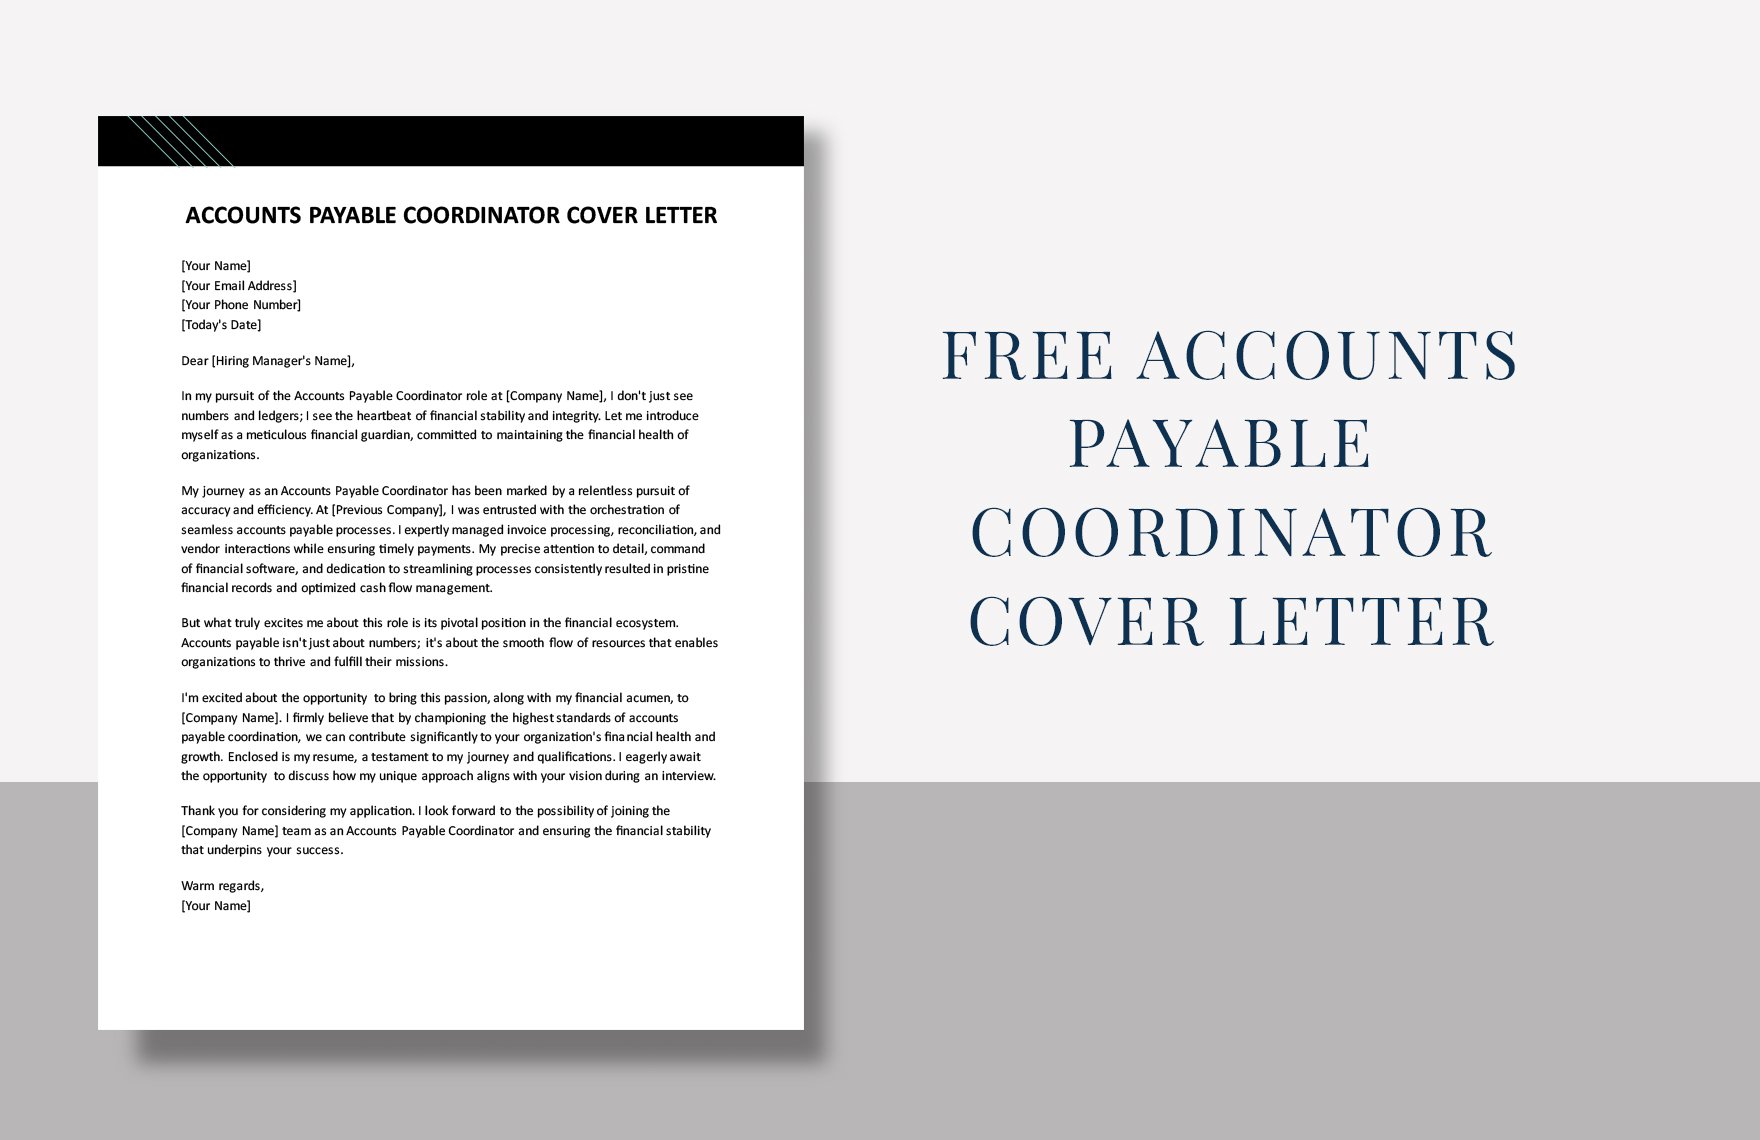 Accounts Payable Coordinator Cover Letter